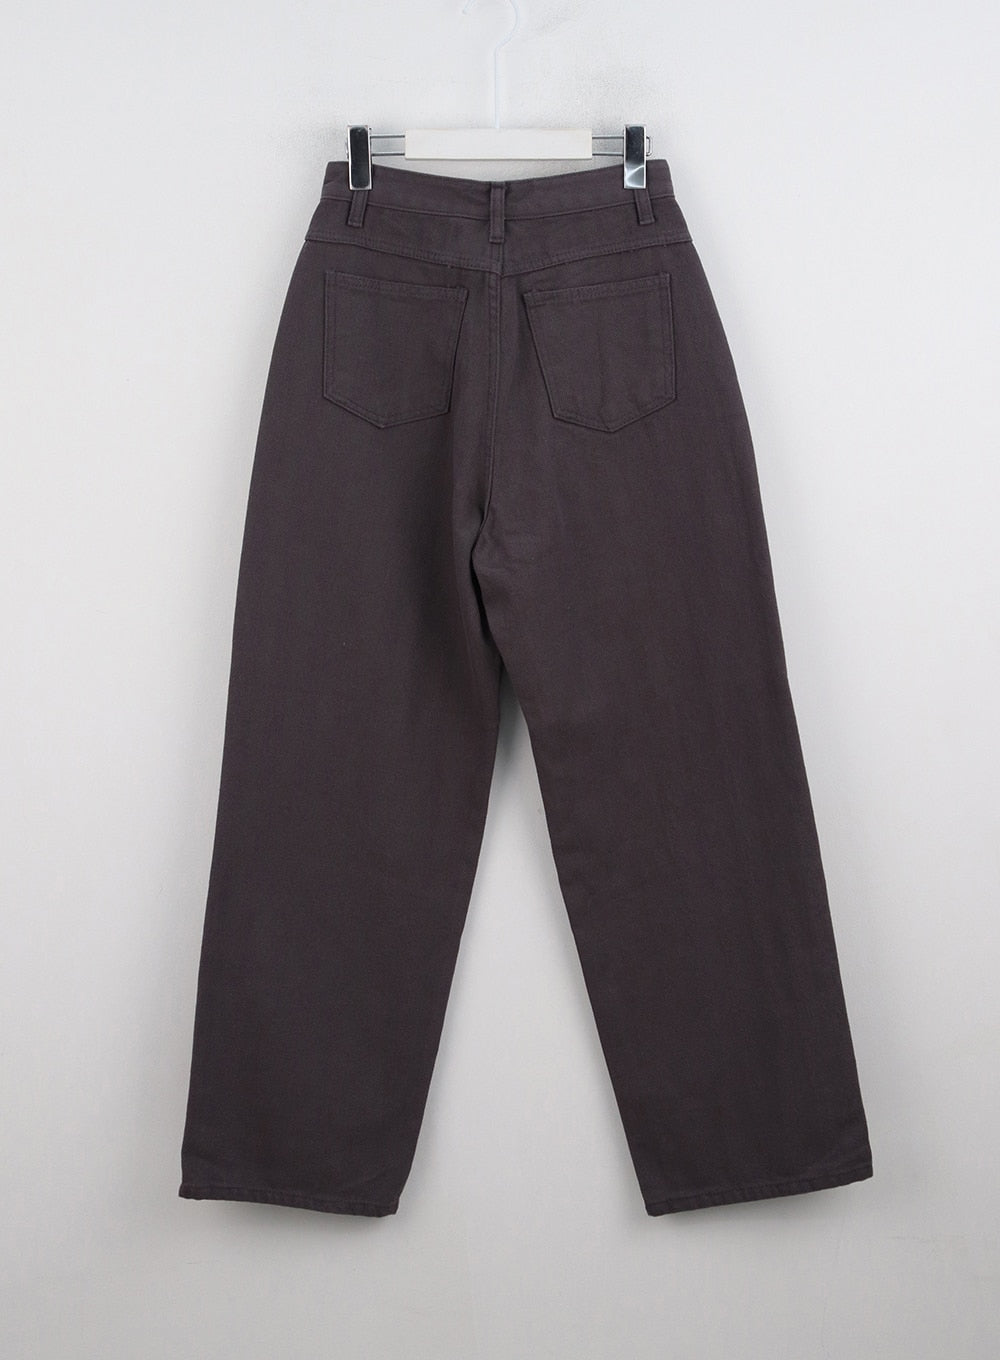 Straight Fit Cotton Pants ON329